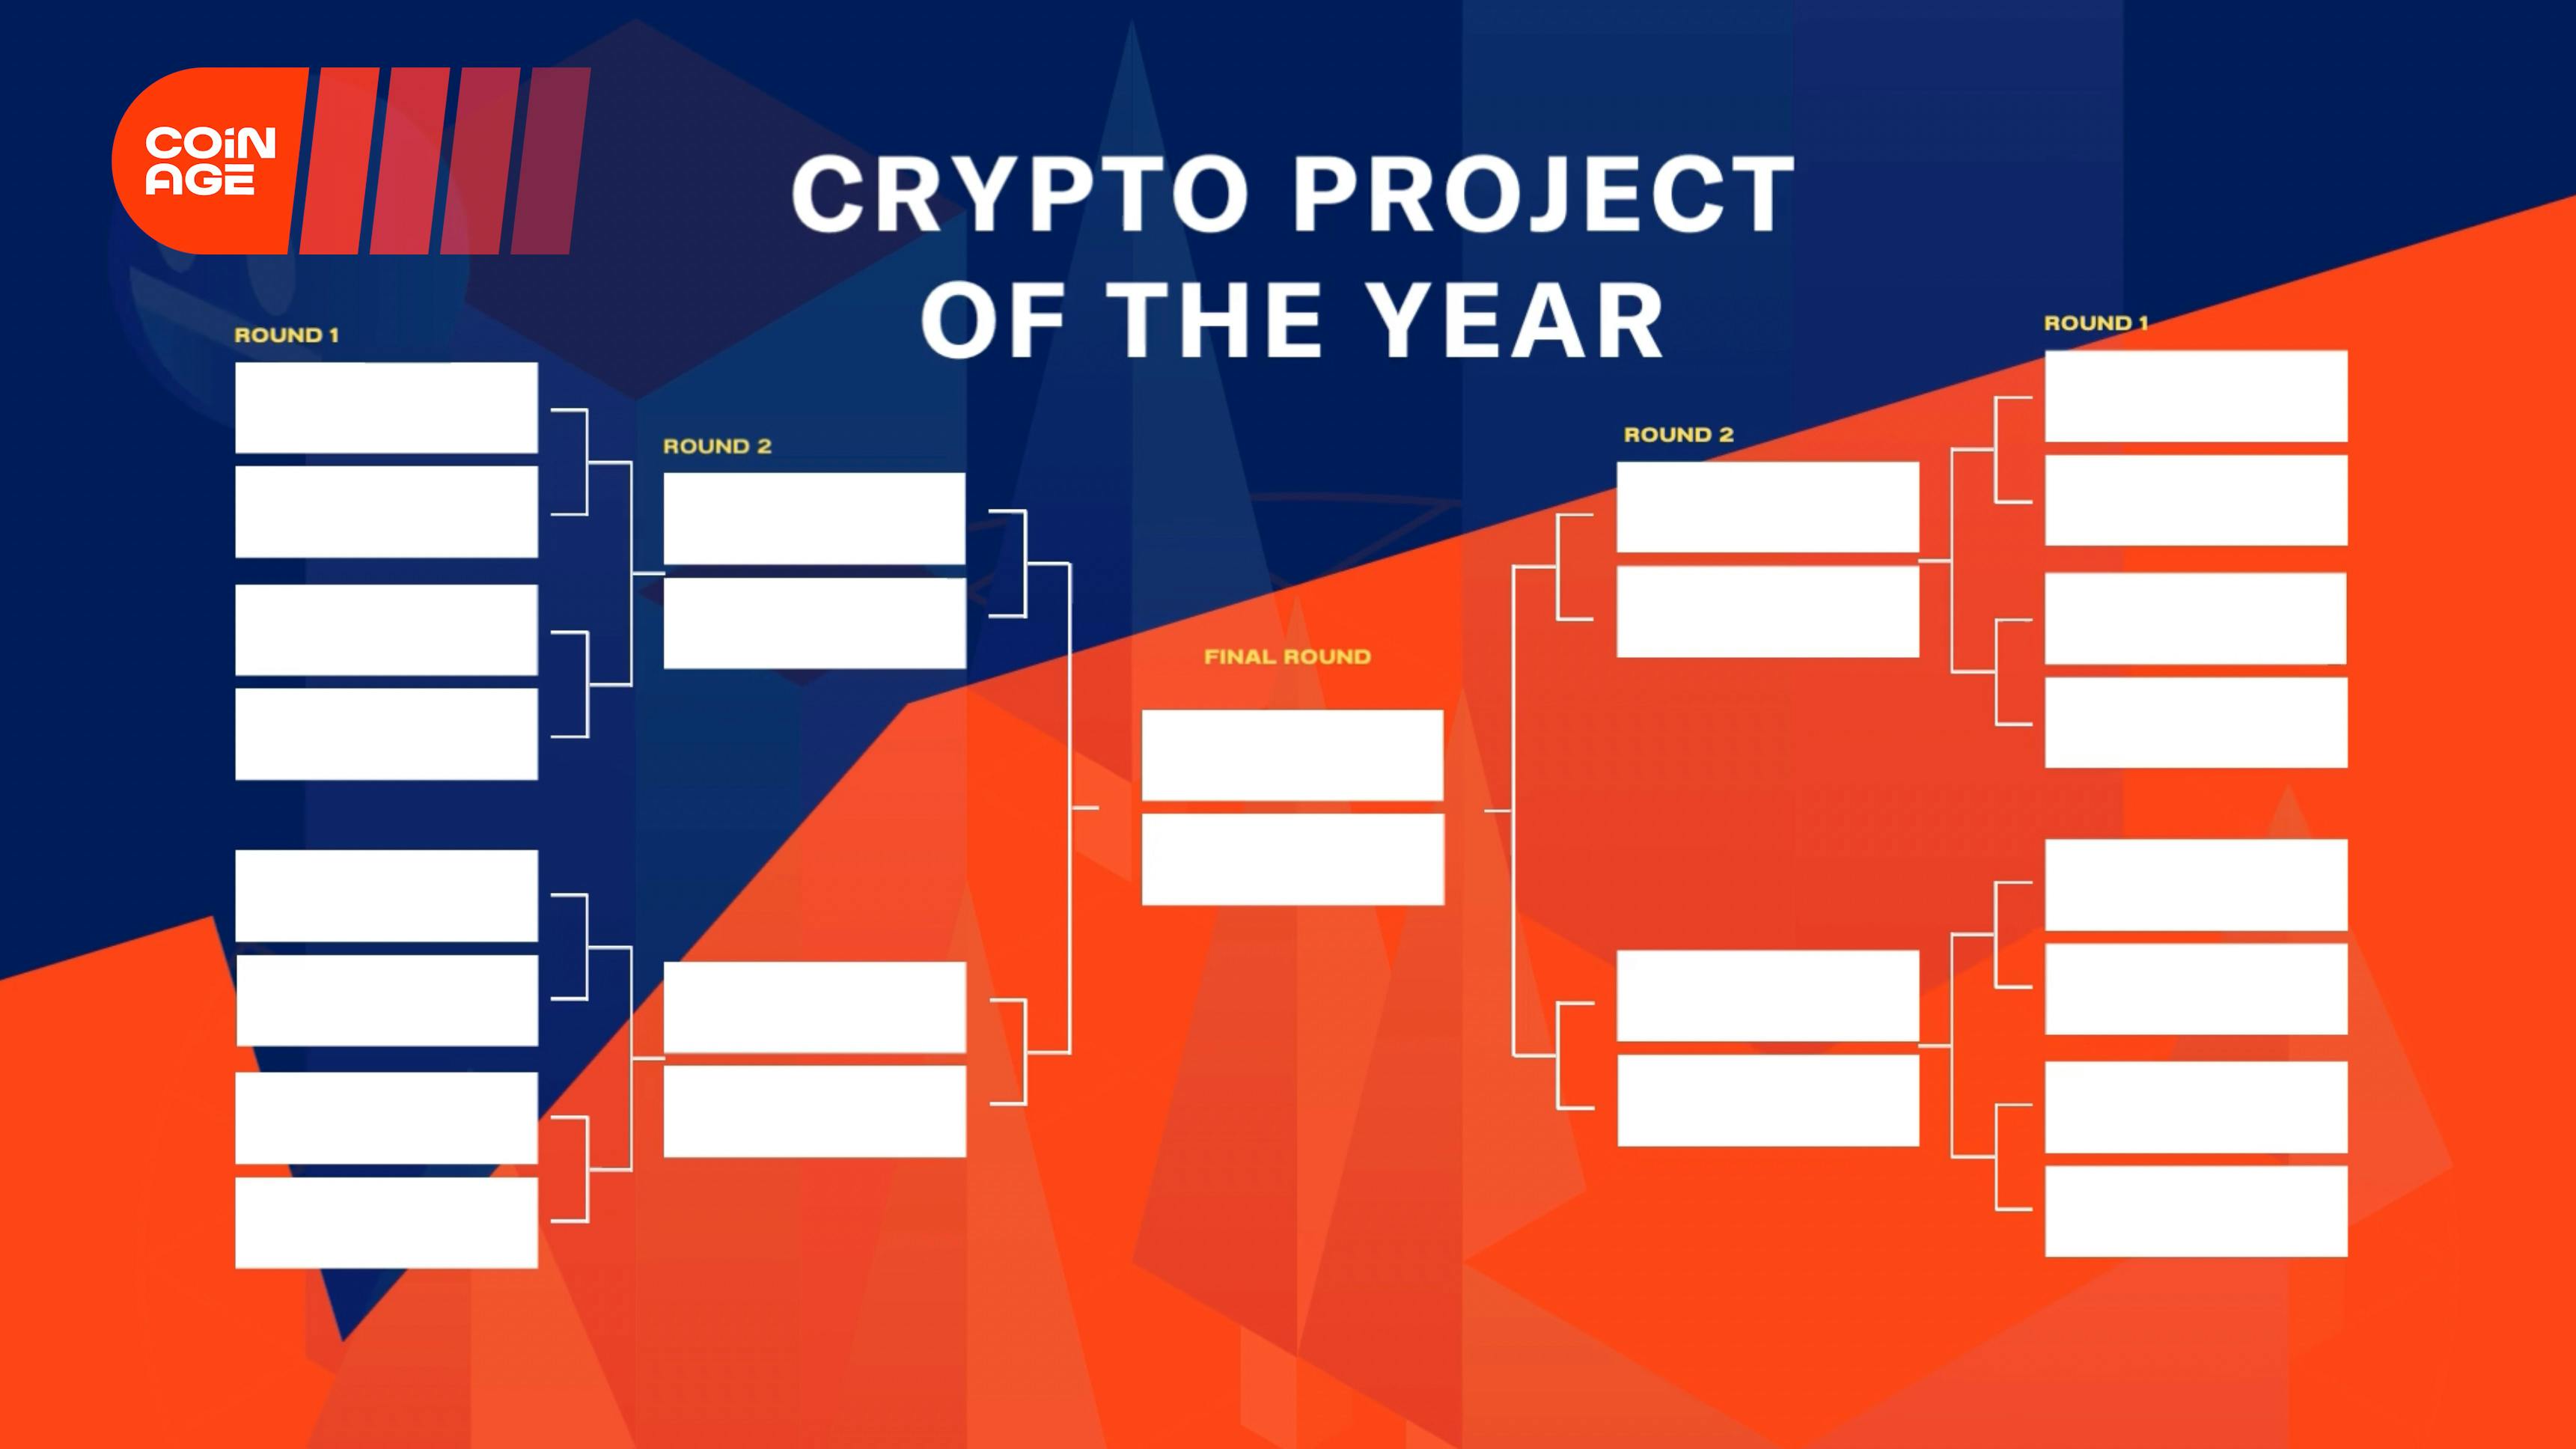 Coinage is naming a Crypto Project of the Year, with the help of the entire Web3 community. Buy an NFT today to join our more than 6,600 community members in crowning a champion.